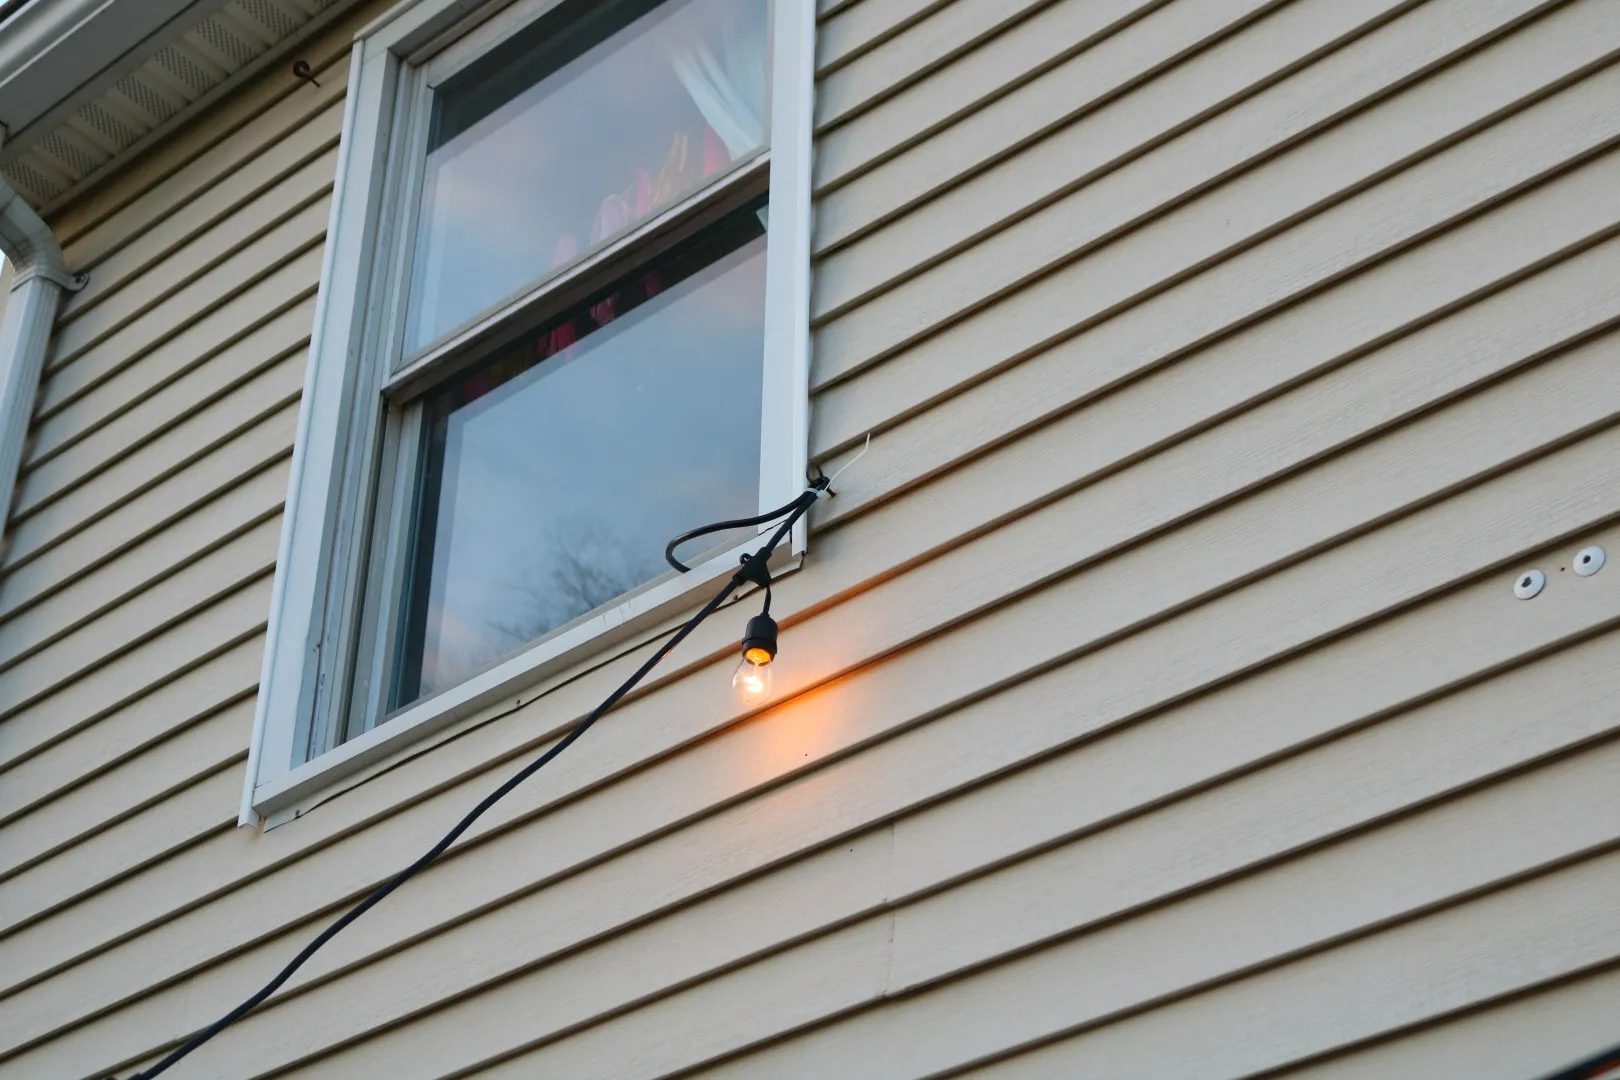 How To Hang Lights From Siding